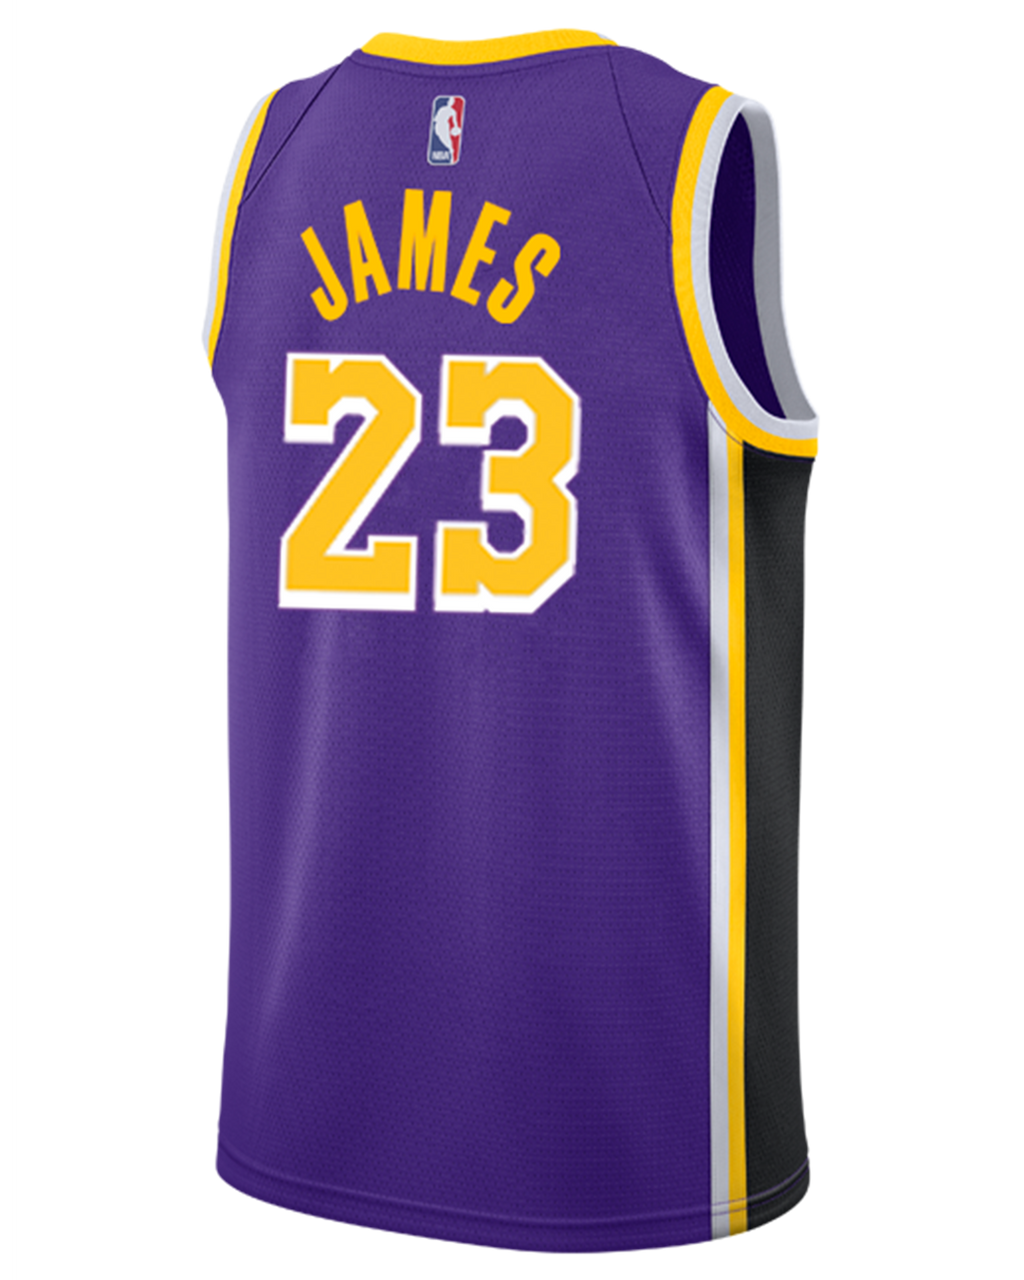 lebron james mamba jersey for sale